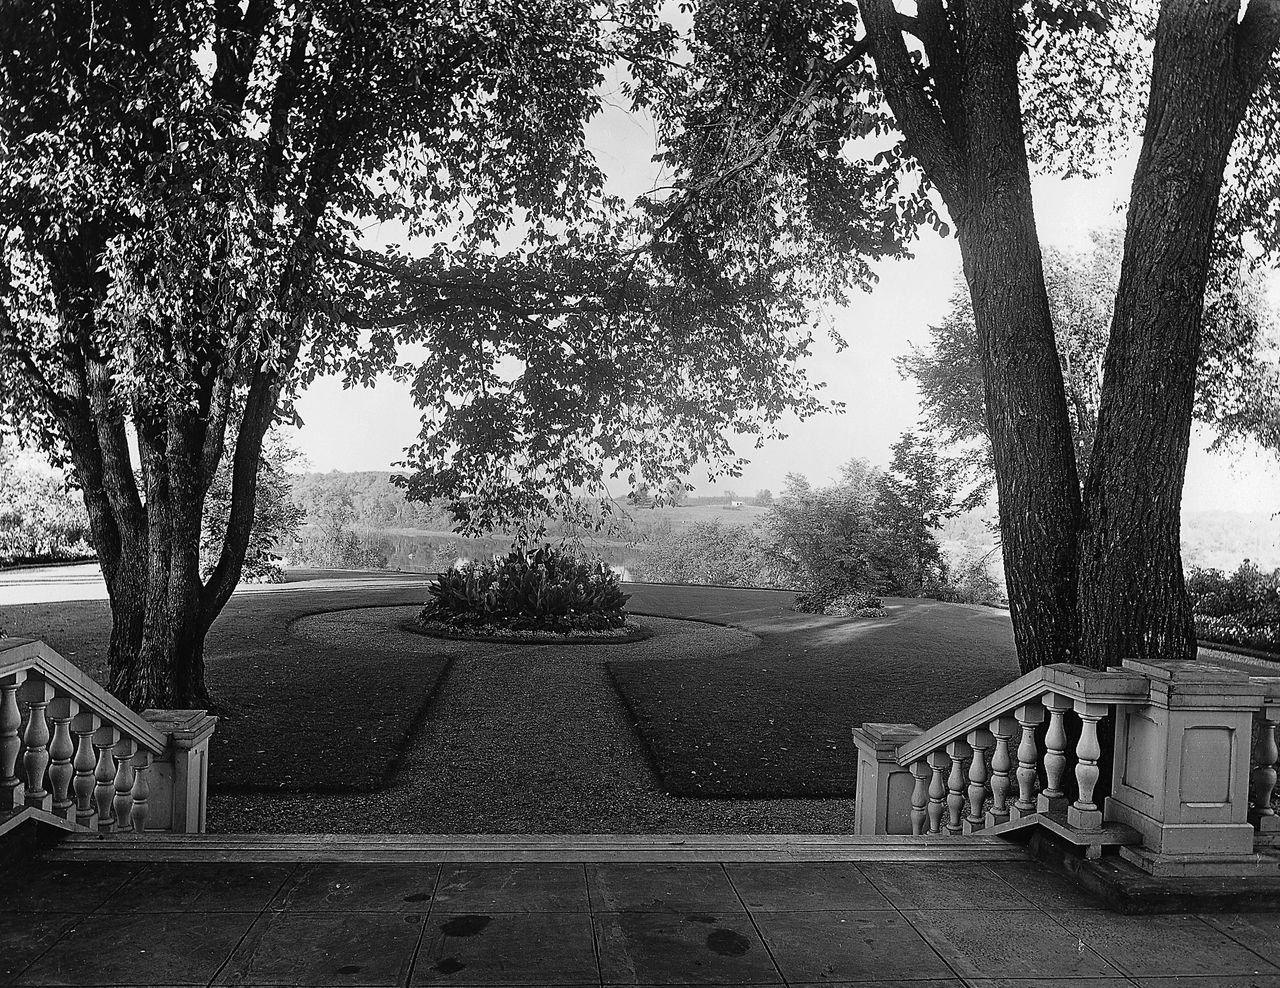 Black and white photograph of a circular garden at the bottom of a stone staircase, near the Saint Francis River.